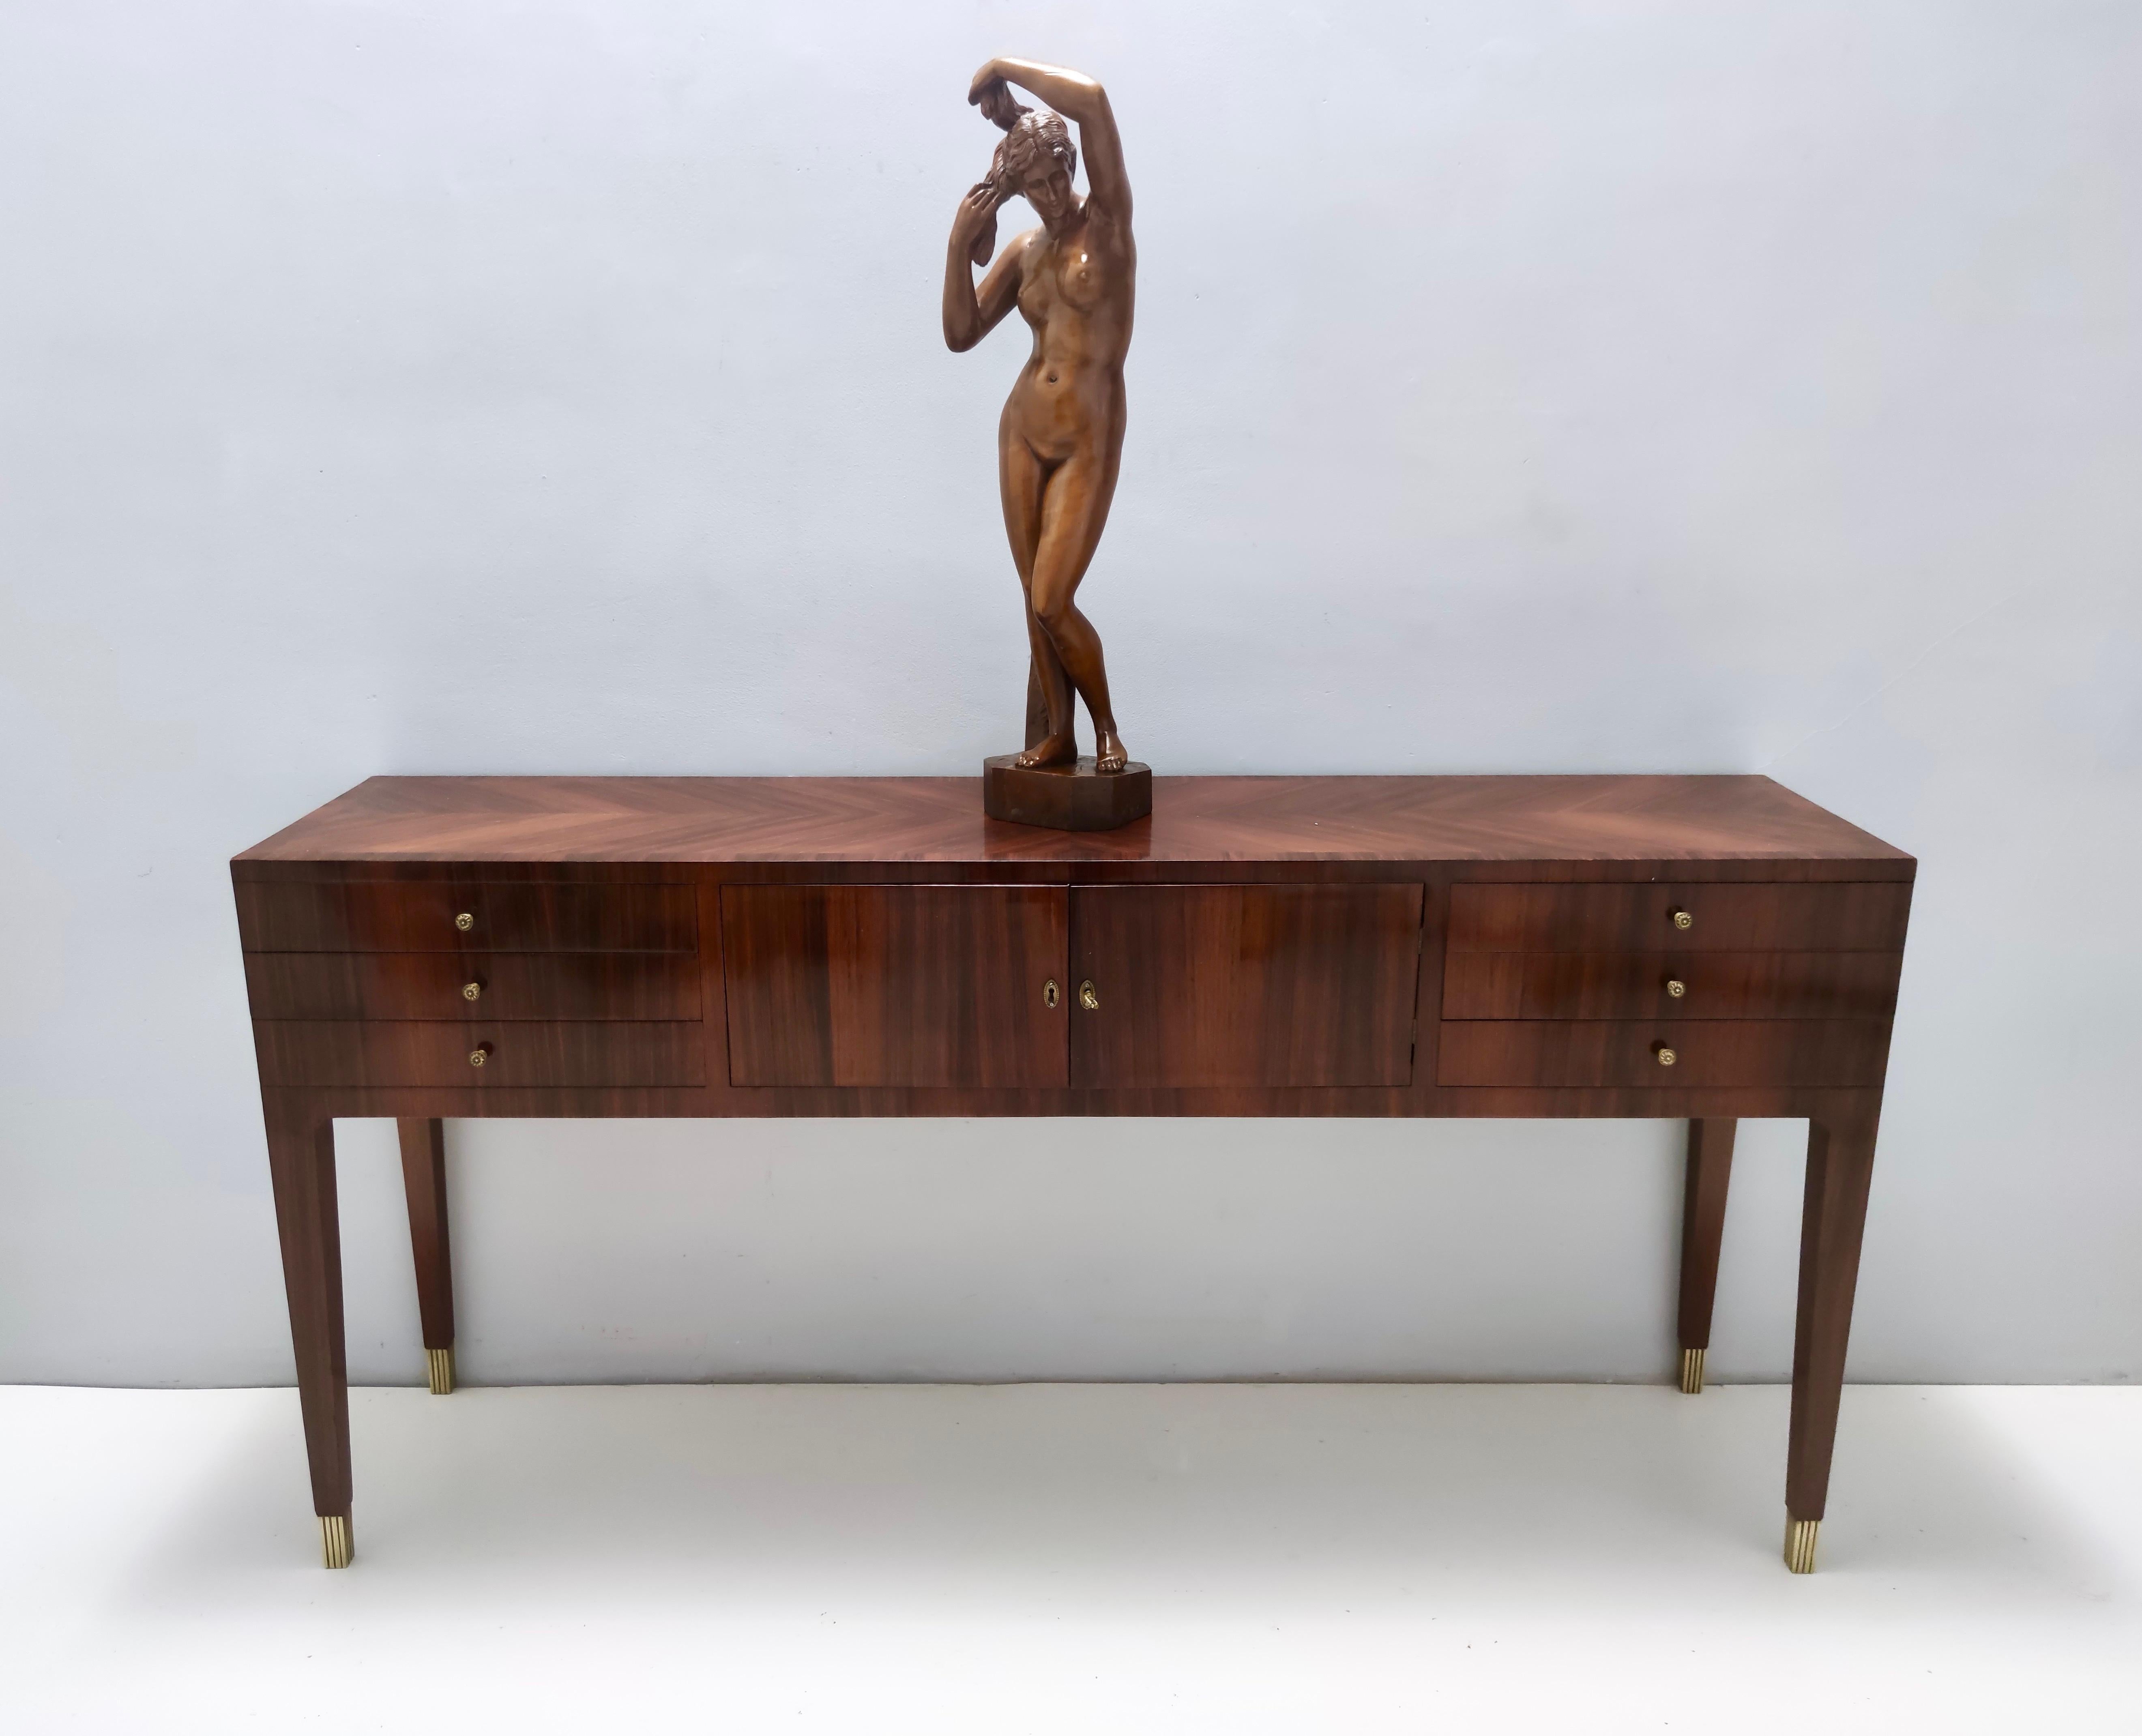 Made in Italy in the 60s in Cantù, a city in Lombardy which is well-known for their talented wood artisans.
This is an incredible high-quality classicist piece, realized in solid walnut blocks to avoid cracks.
It's been hand-polished.
It is a